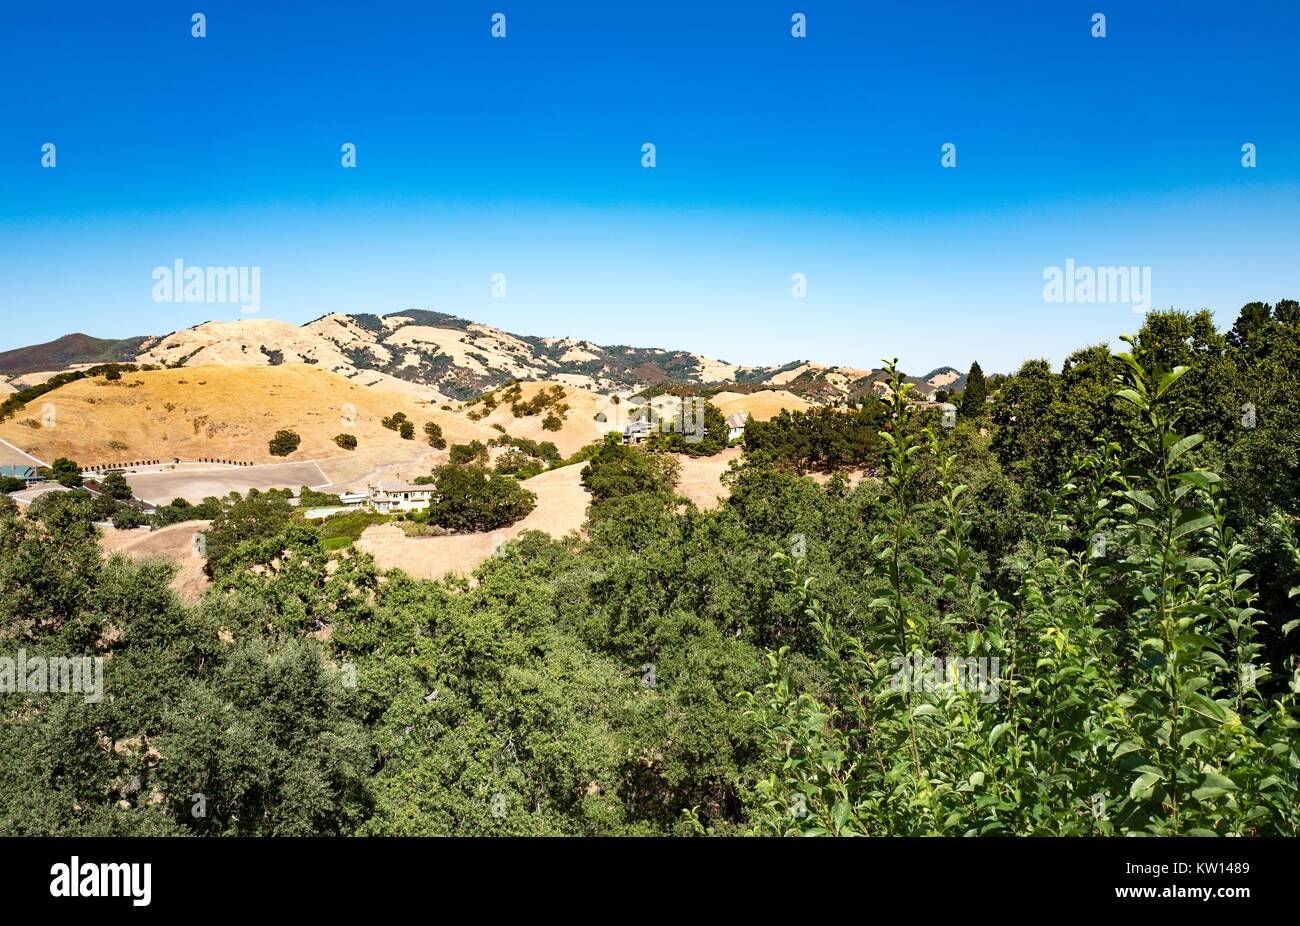 Mount Diablo and the Diablo foothills in the East Bay region of the San Francisco Bay Area on a sunny day, Alamo, California, 2016. Stock Photo